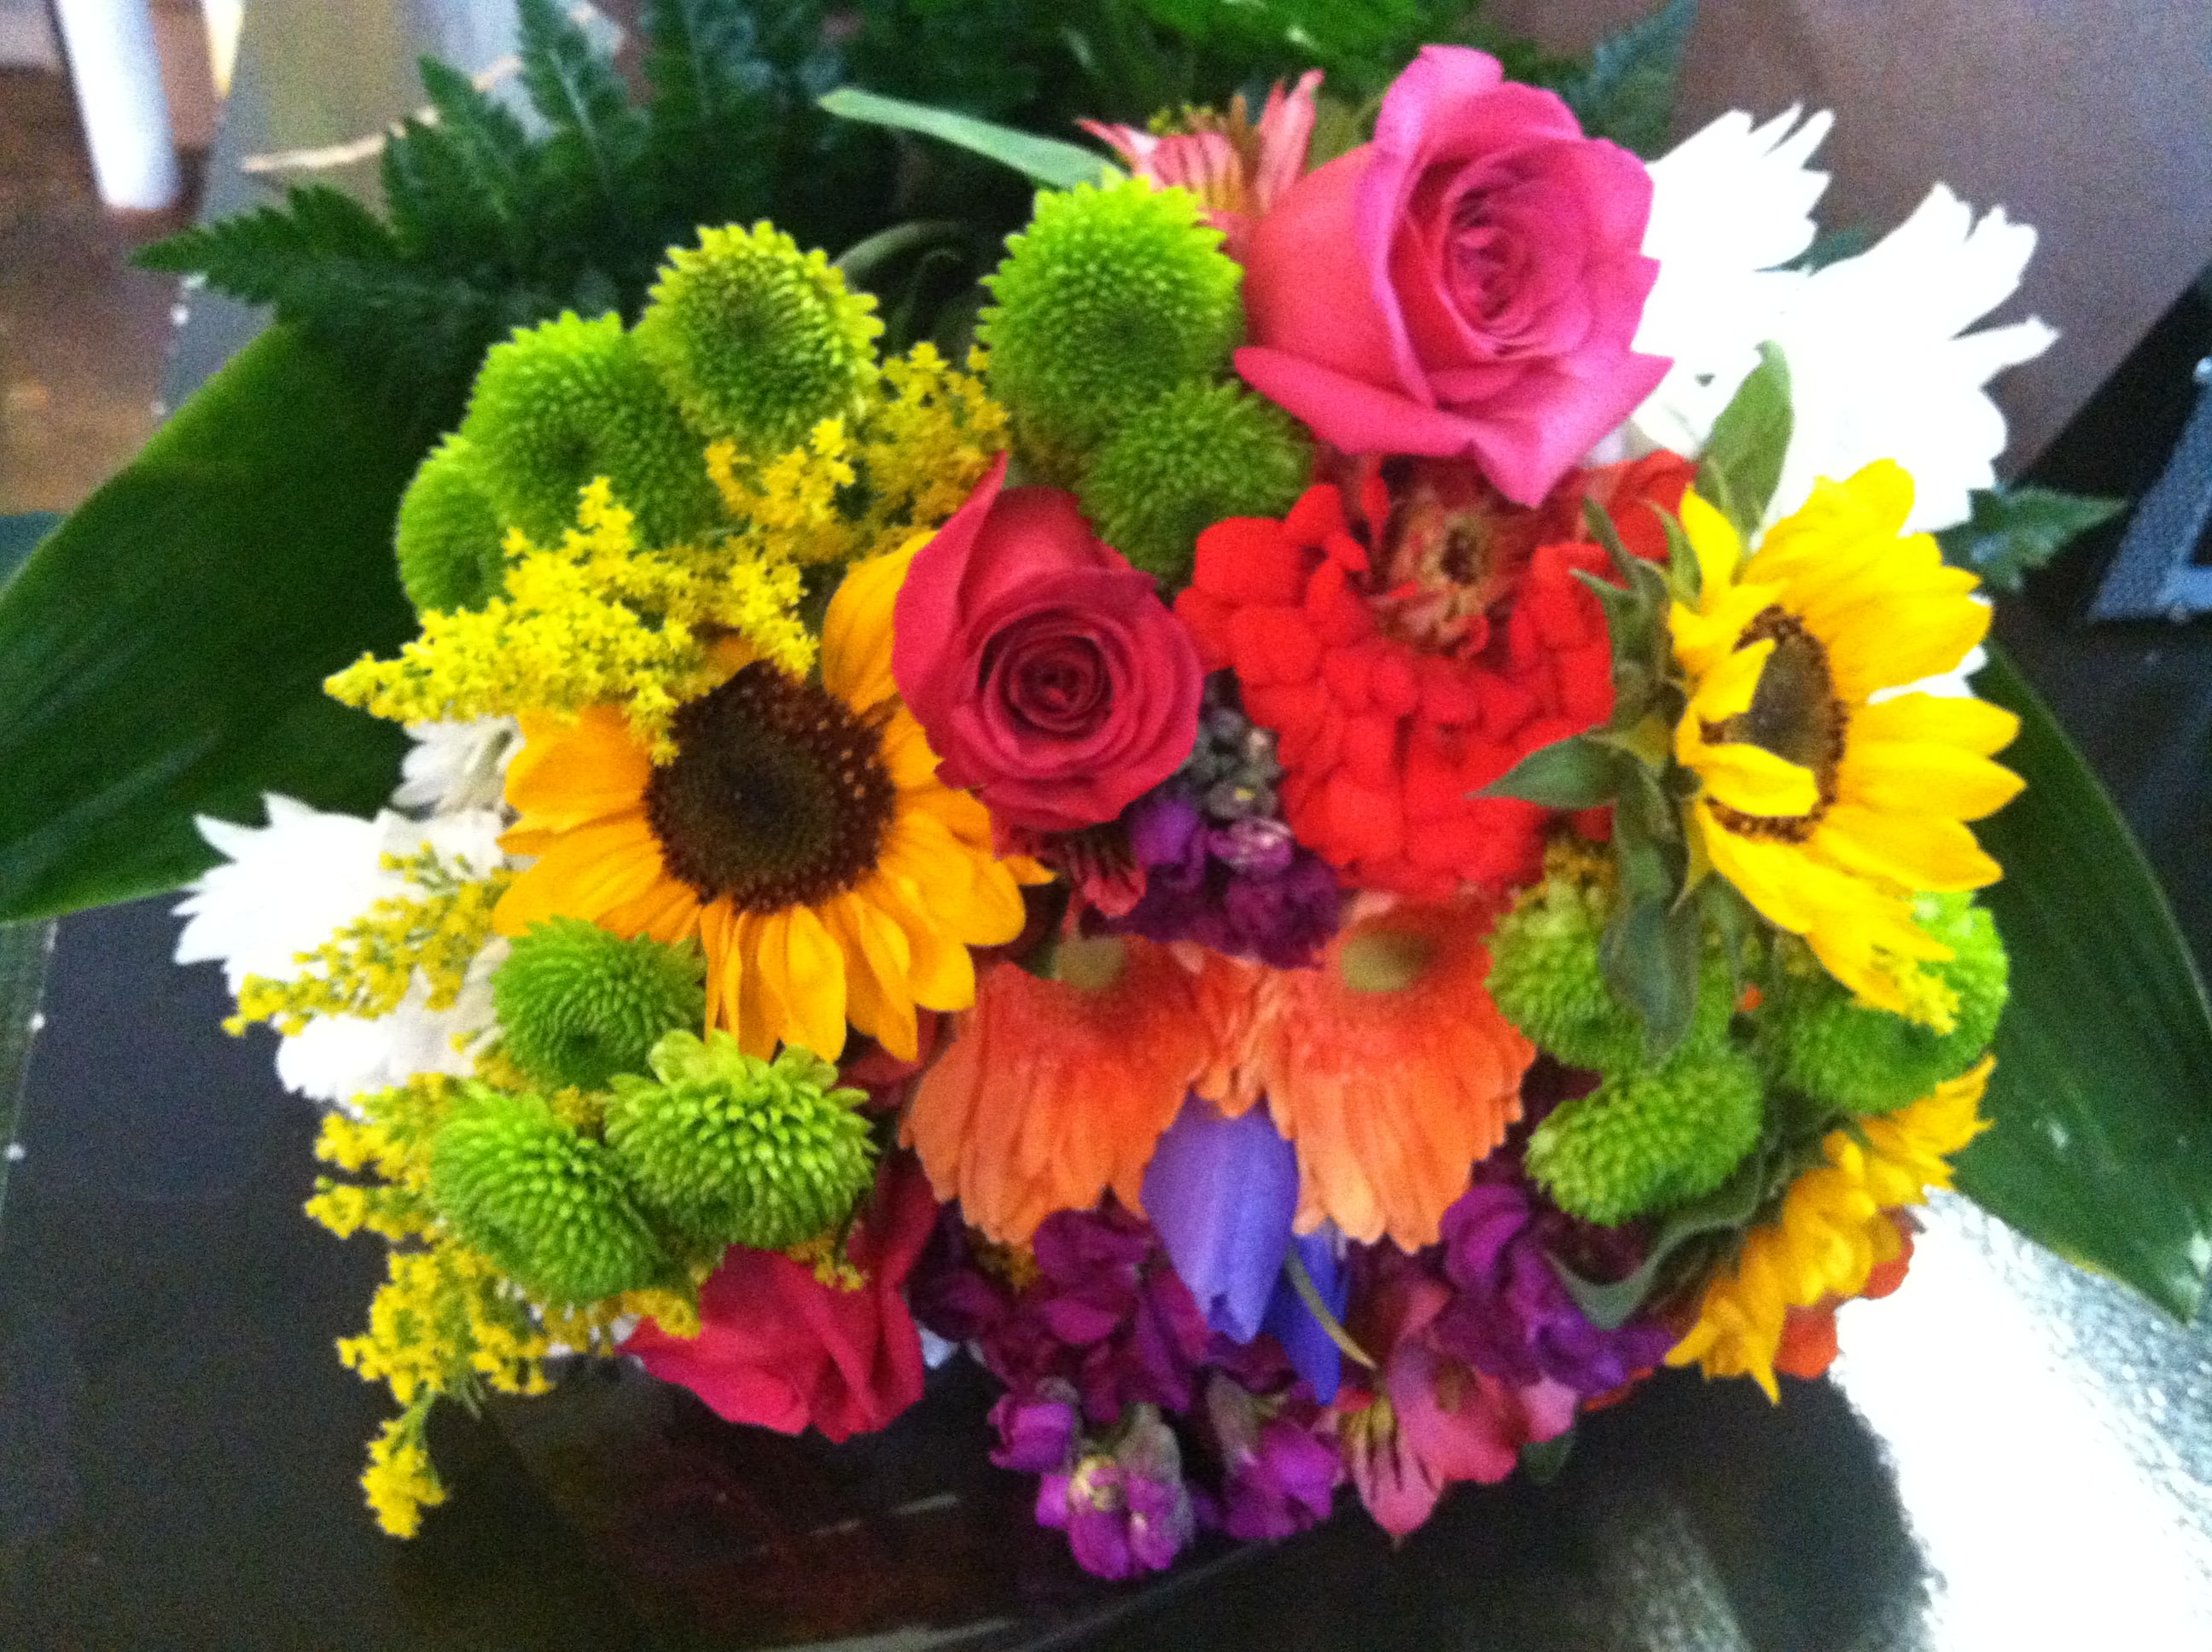 Fortino's Flowers can help make and ordinary day extrodinary! - Fortino ...